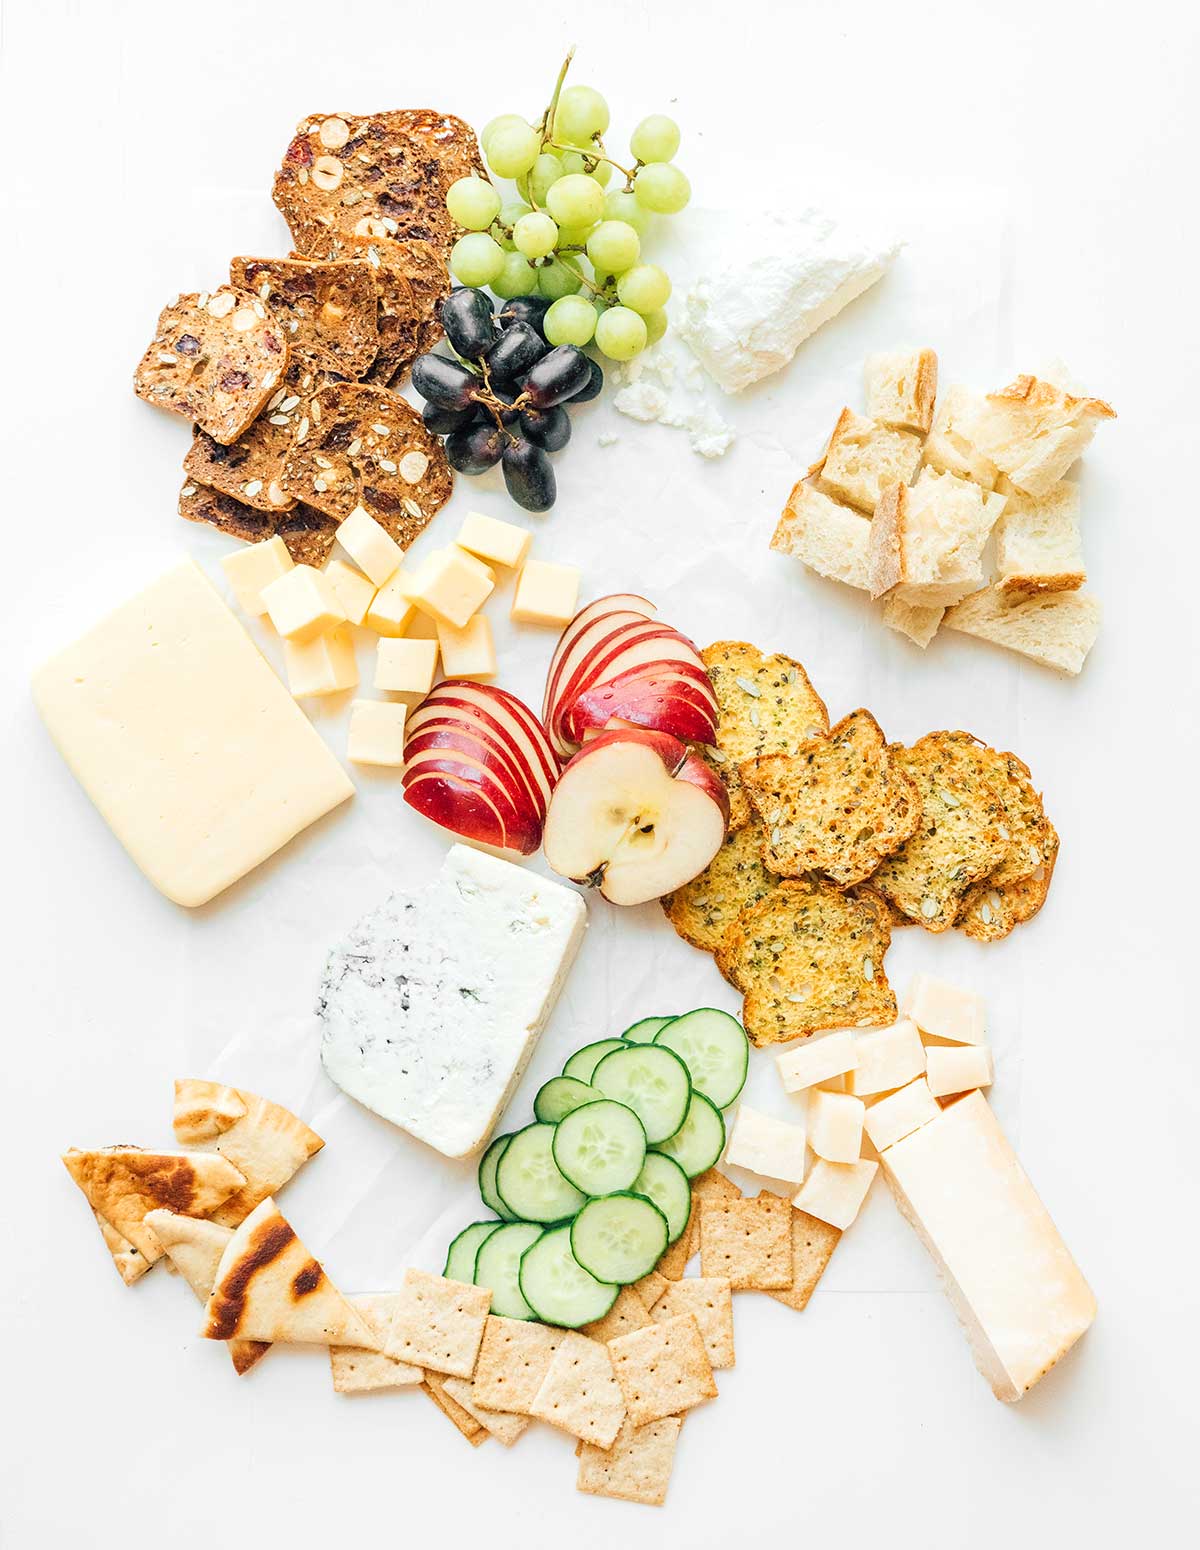 A charcuterie board that is coming together with crackers, breads, fruits, veggies, and cheeses